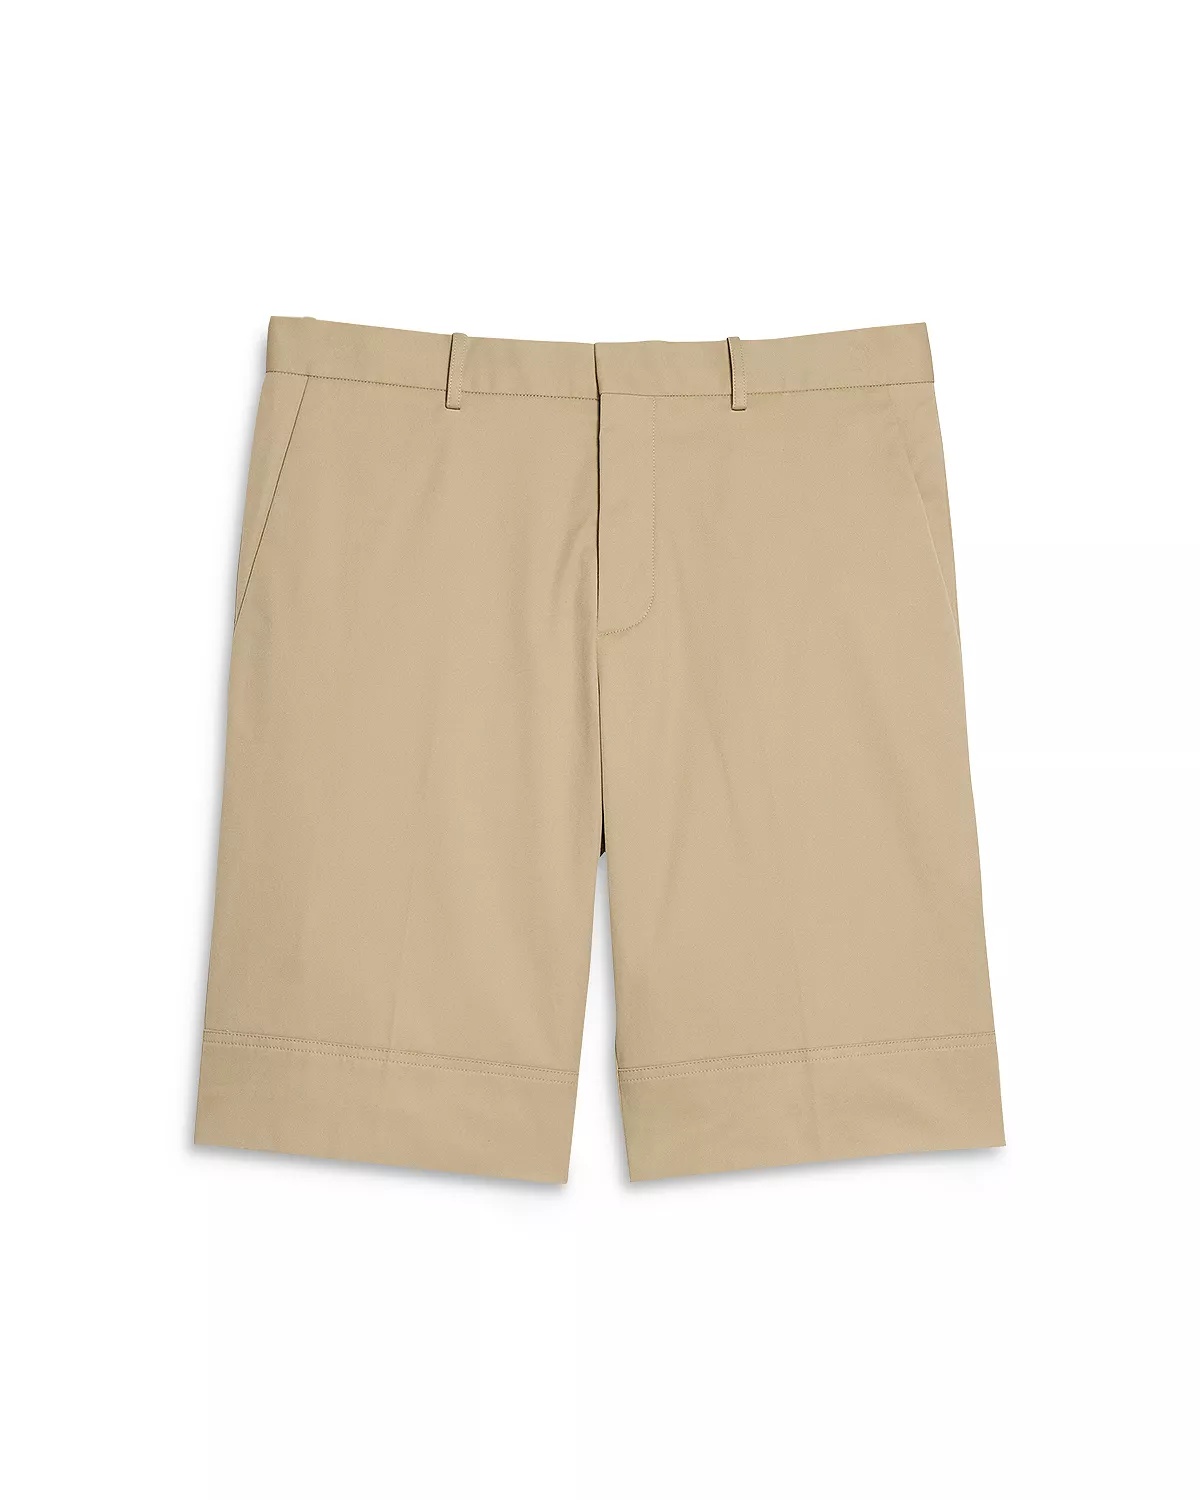 Relaxed Fit 9" Carpenter Shorts - 6